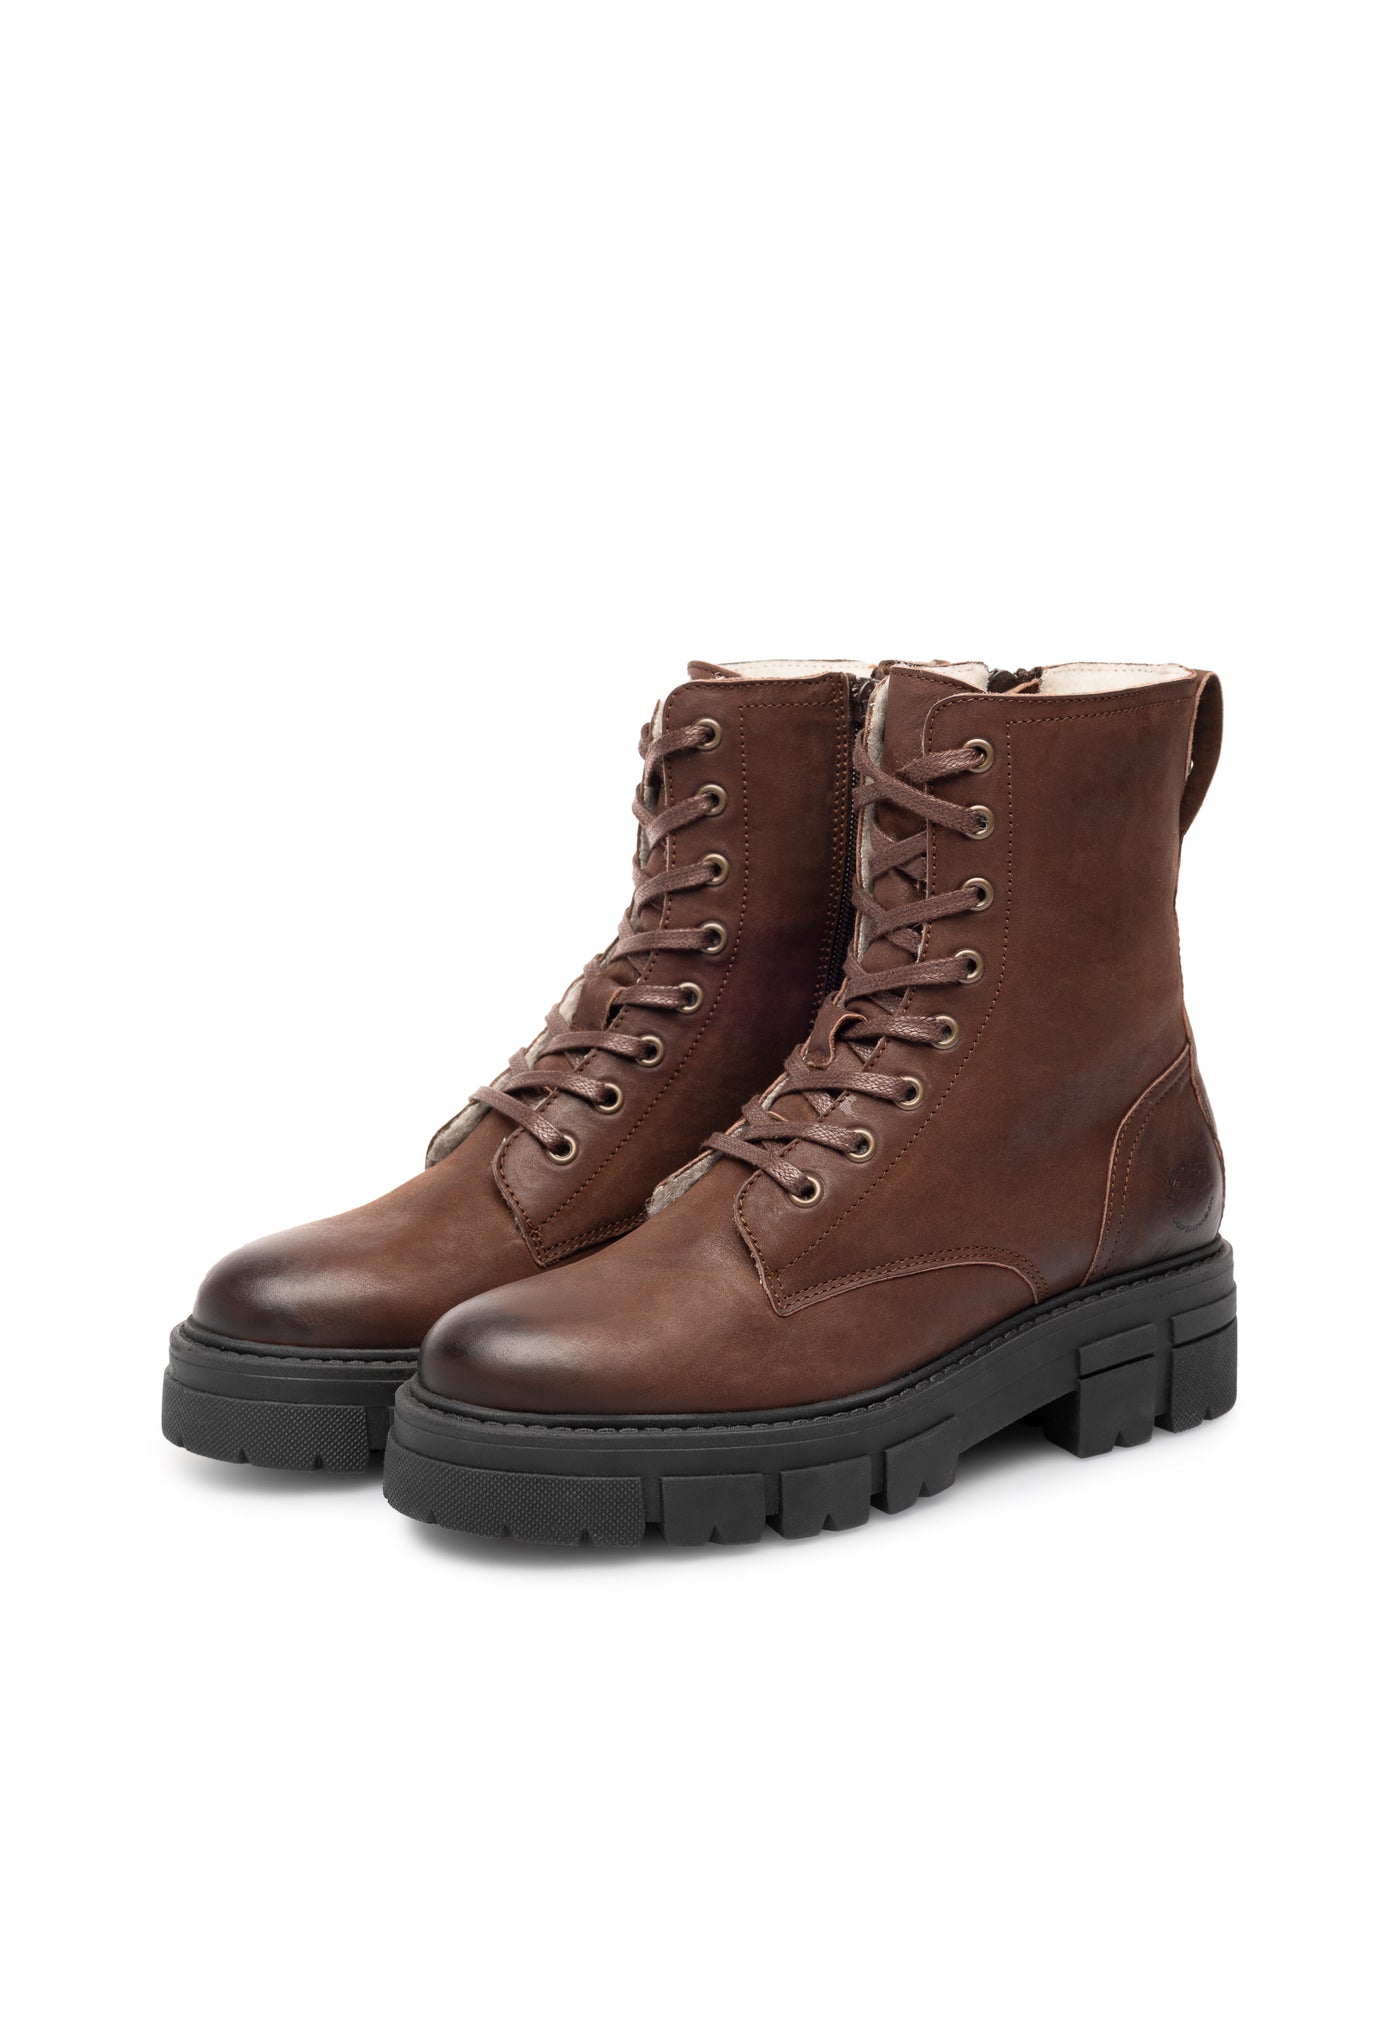 CASHOTT CASJIDA Lace Boot Warm Lined Water Repellent Nubuck Vegetable Tanned Lace Up Coffee